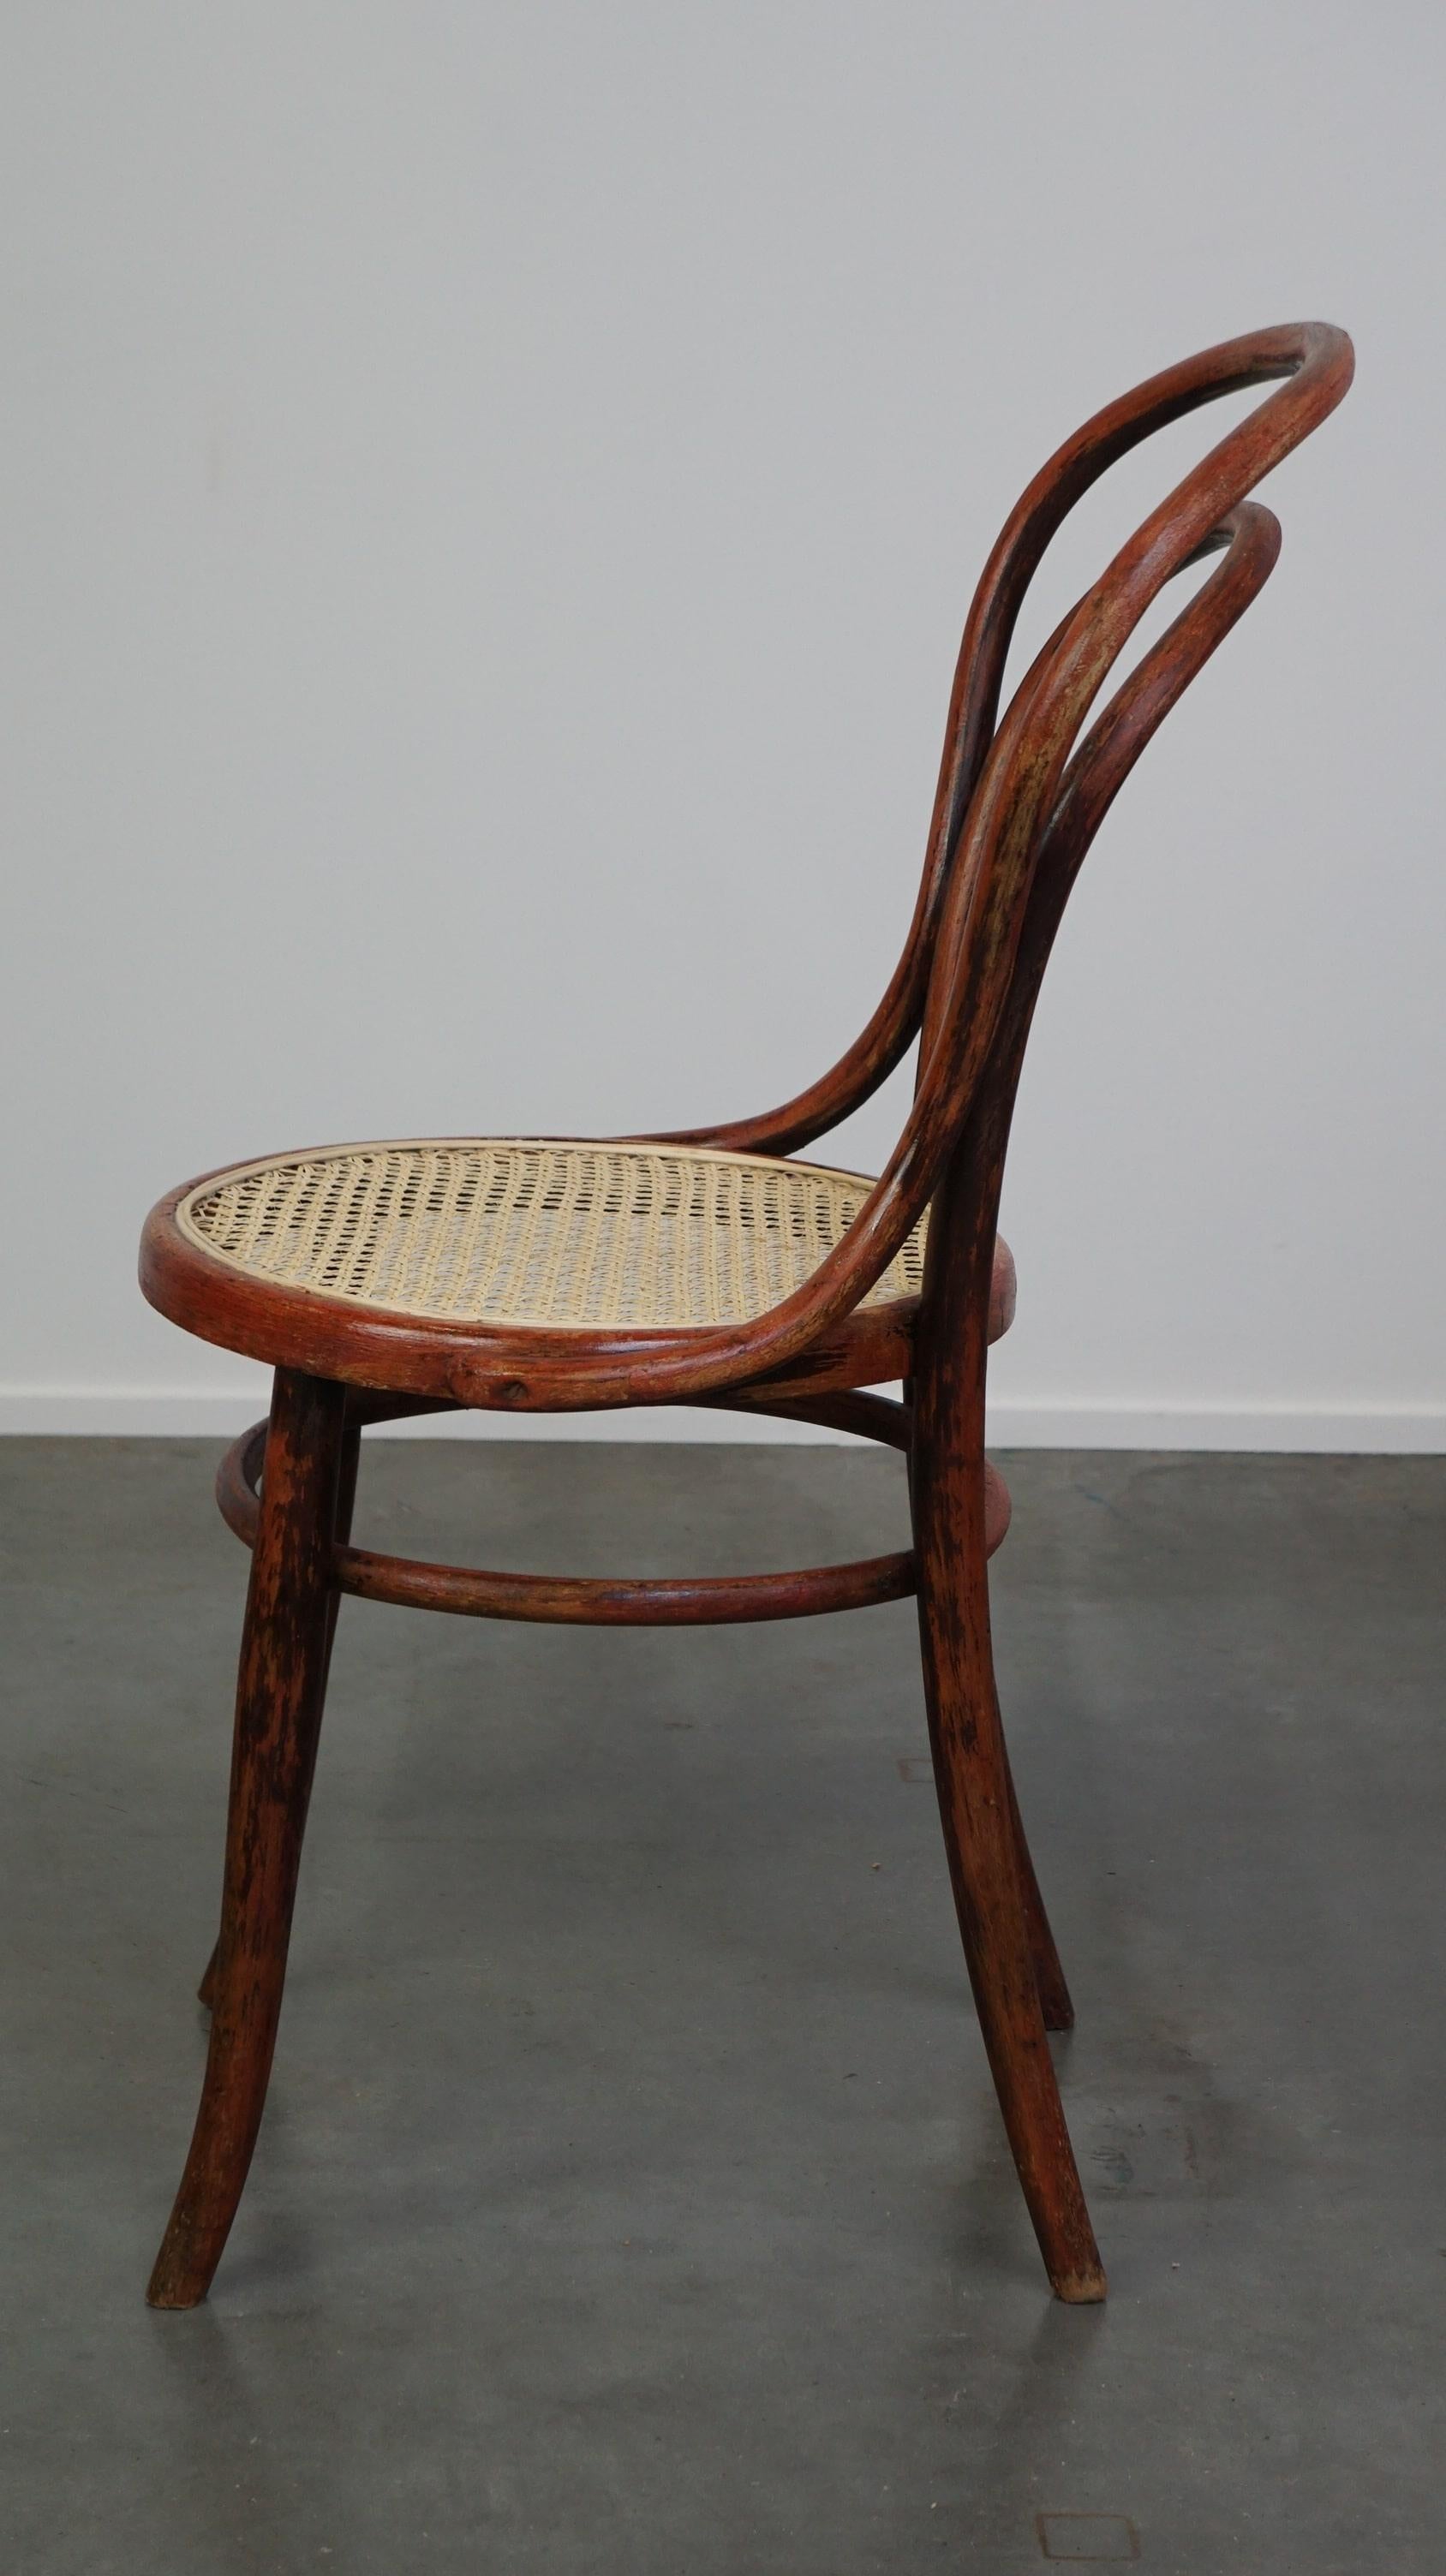 Wood Original antique Thonet chair no. 14 with a beautiful patina and a new matte sea For Sale